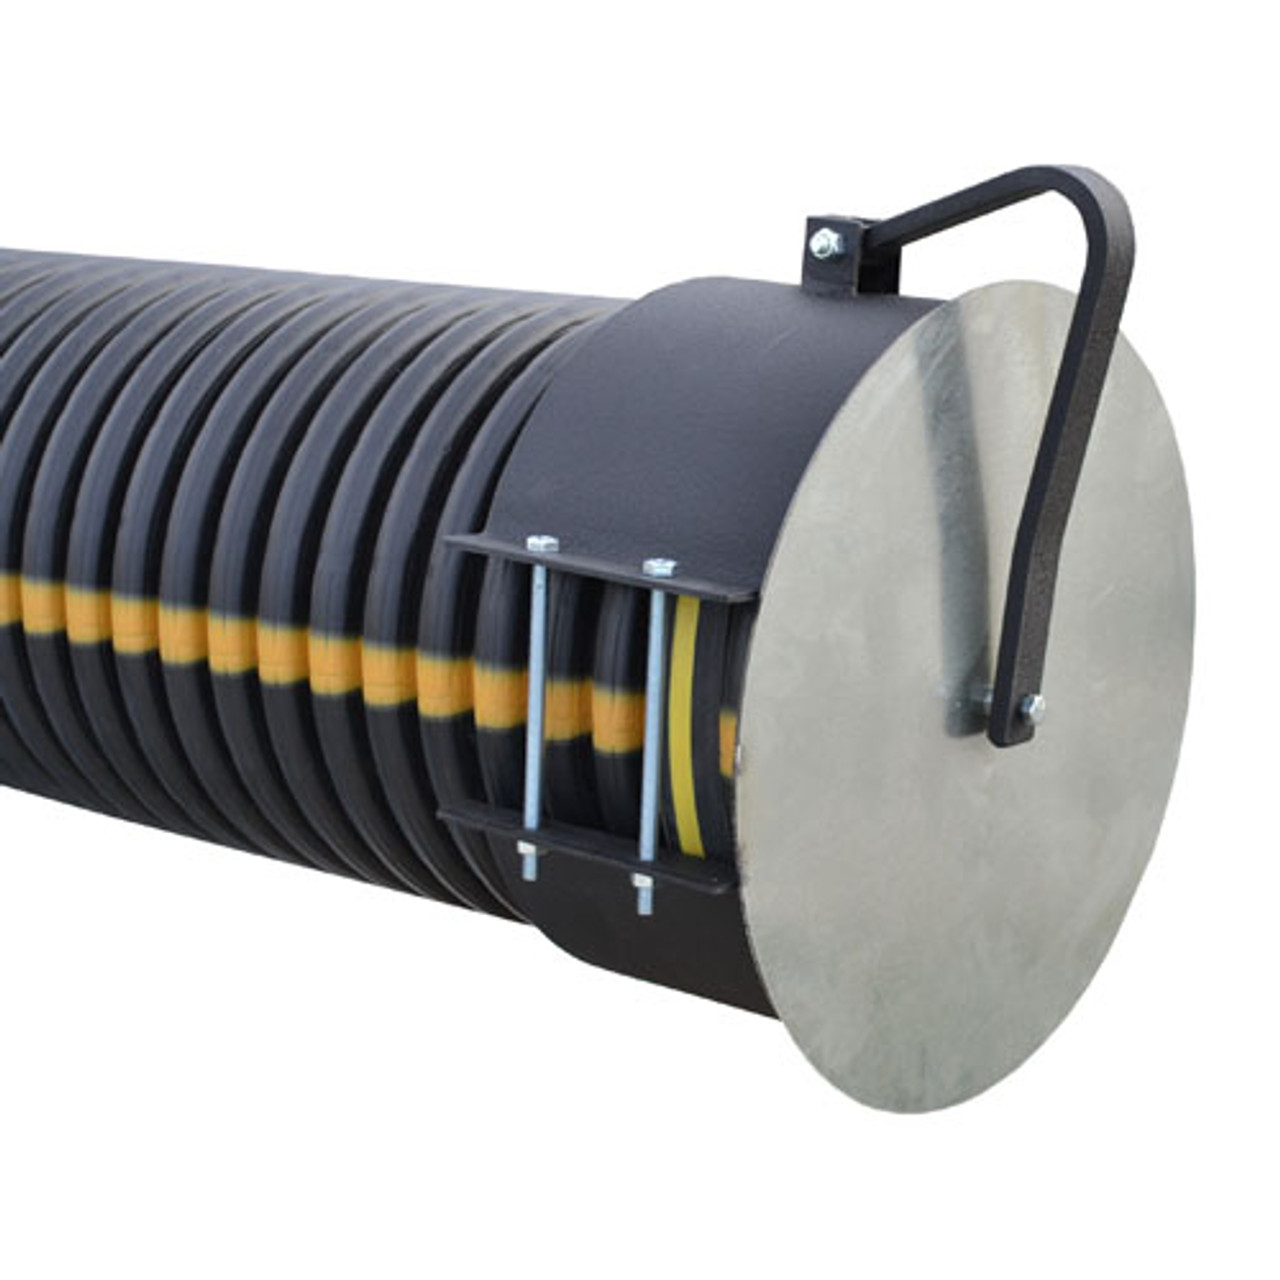 Flap Gate 10" for Corrugated Plastic Pipe The Drainage Products Store